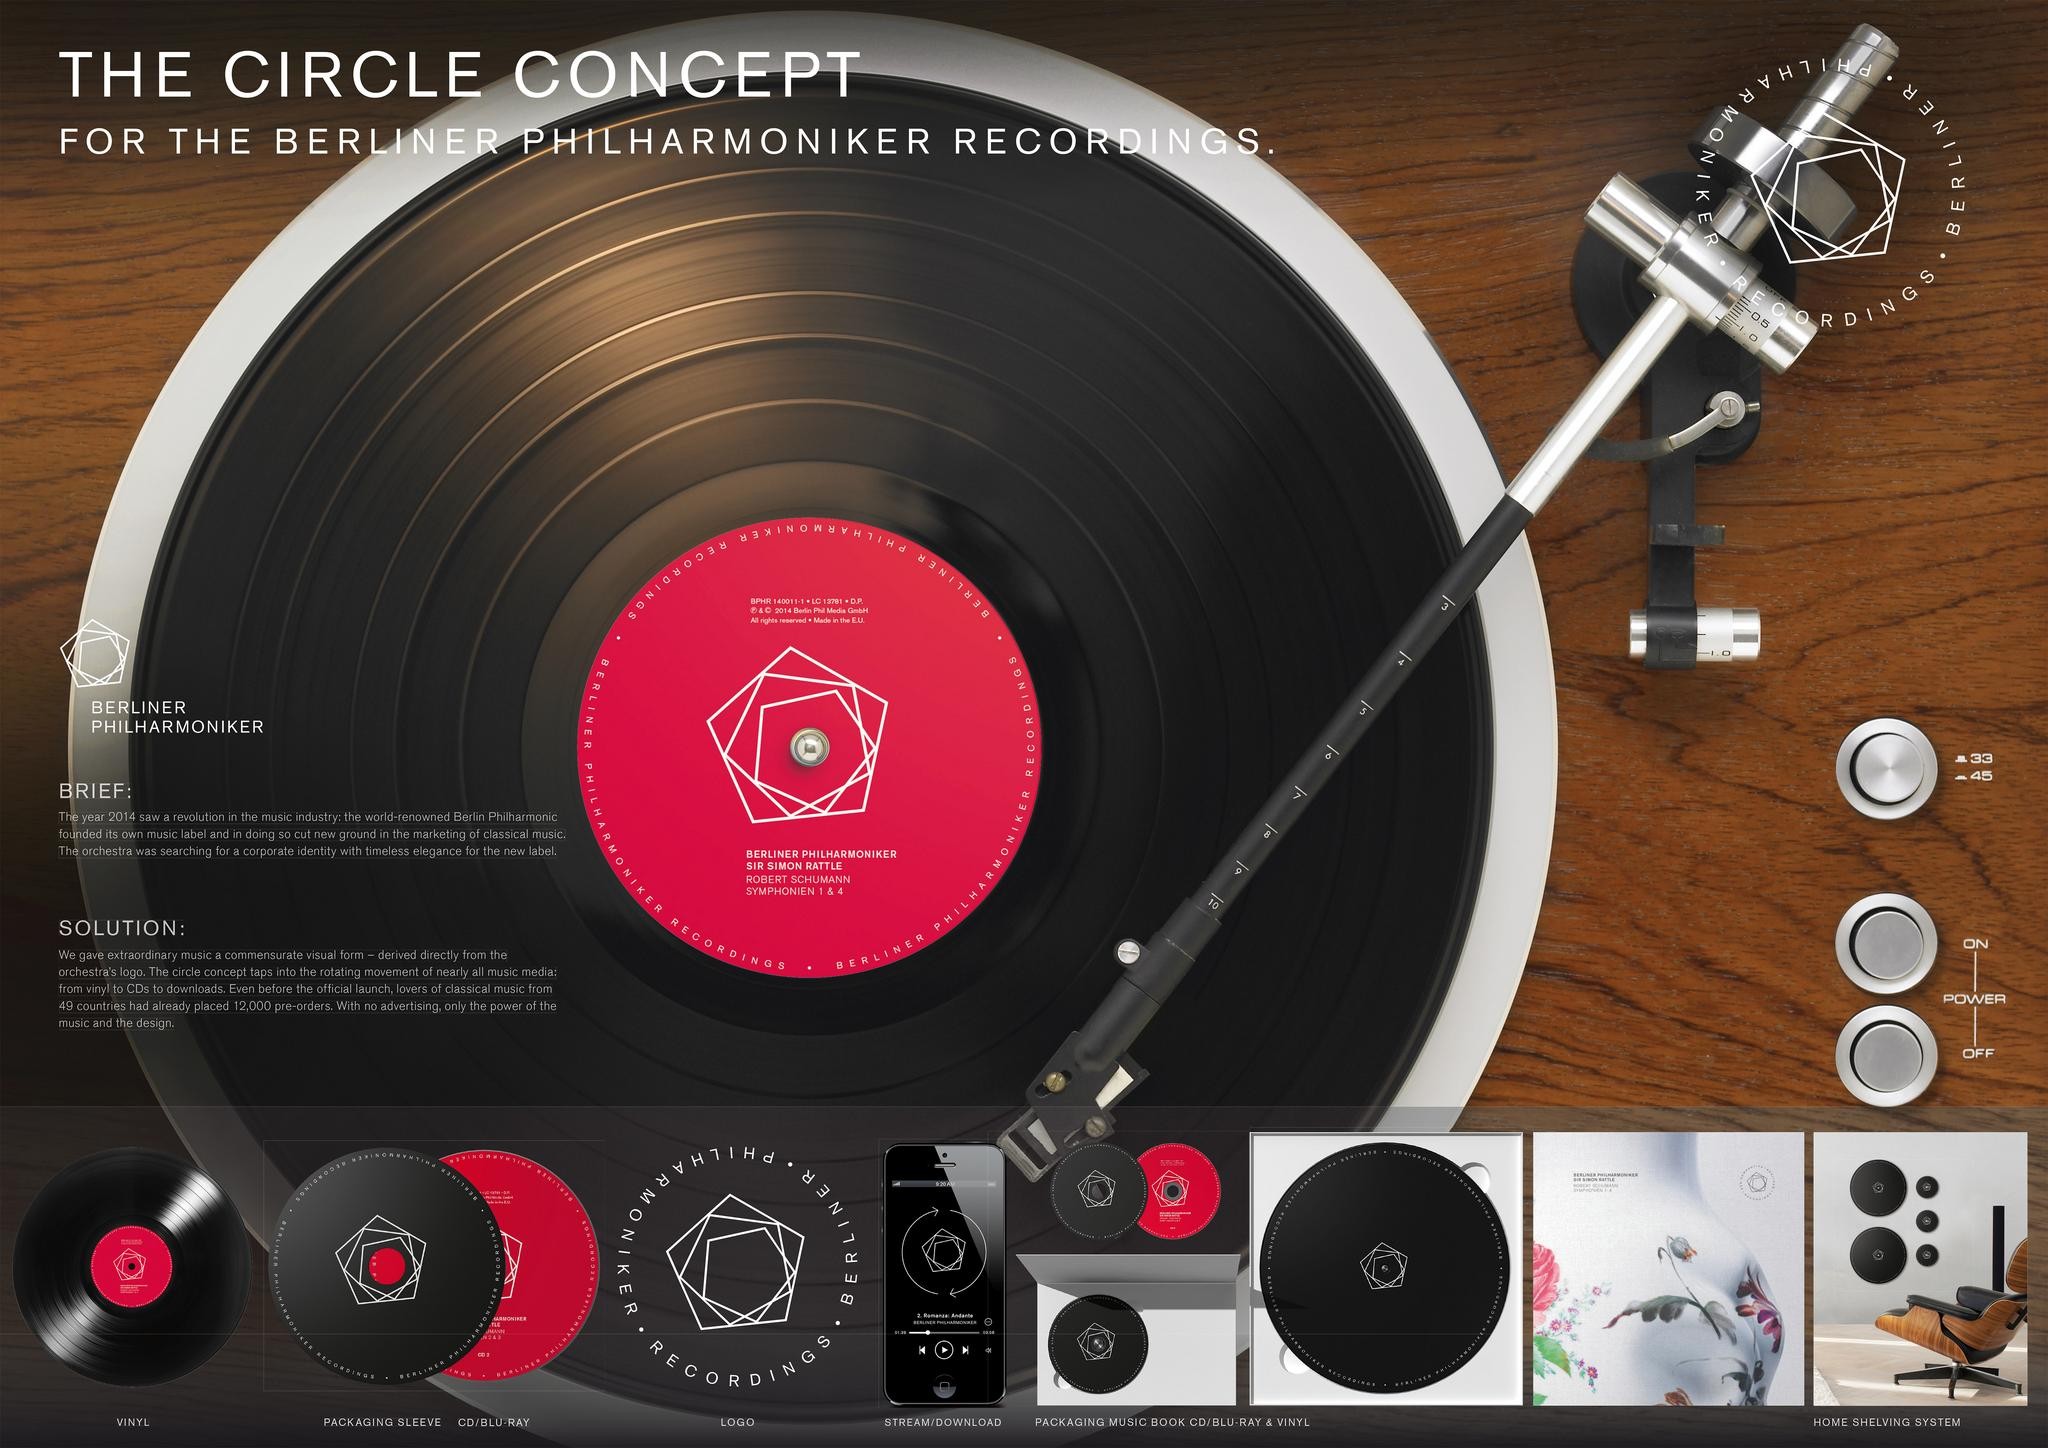 THE CIRCLE CONCEPT: FOR THE BERLINER PHILHARMONIKER RECORDINGS.